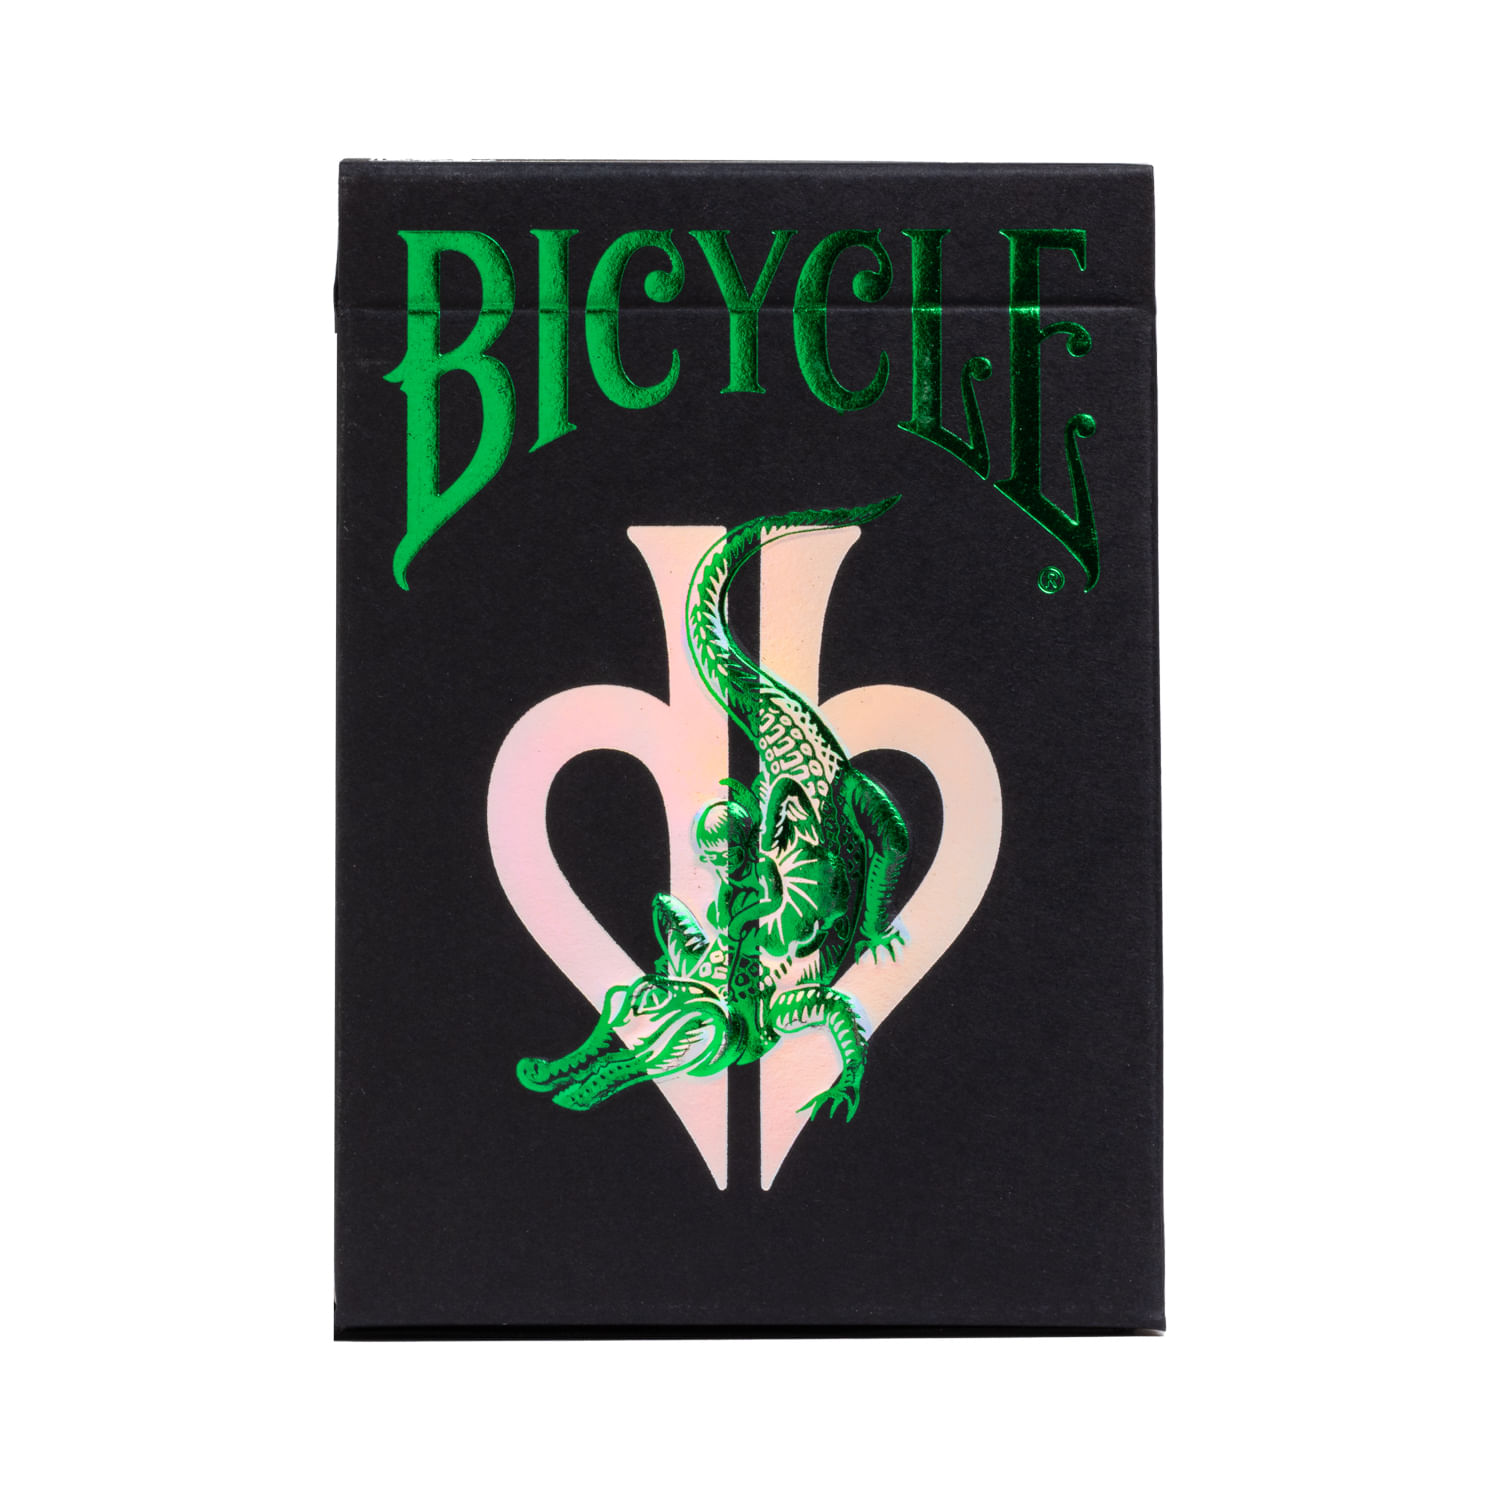 Bicycle David Blaine Gator Back Holographic MetalLuxe Playing Cards